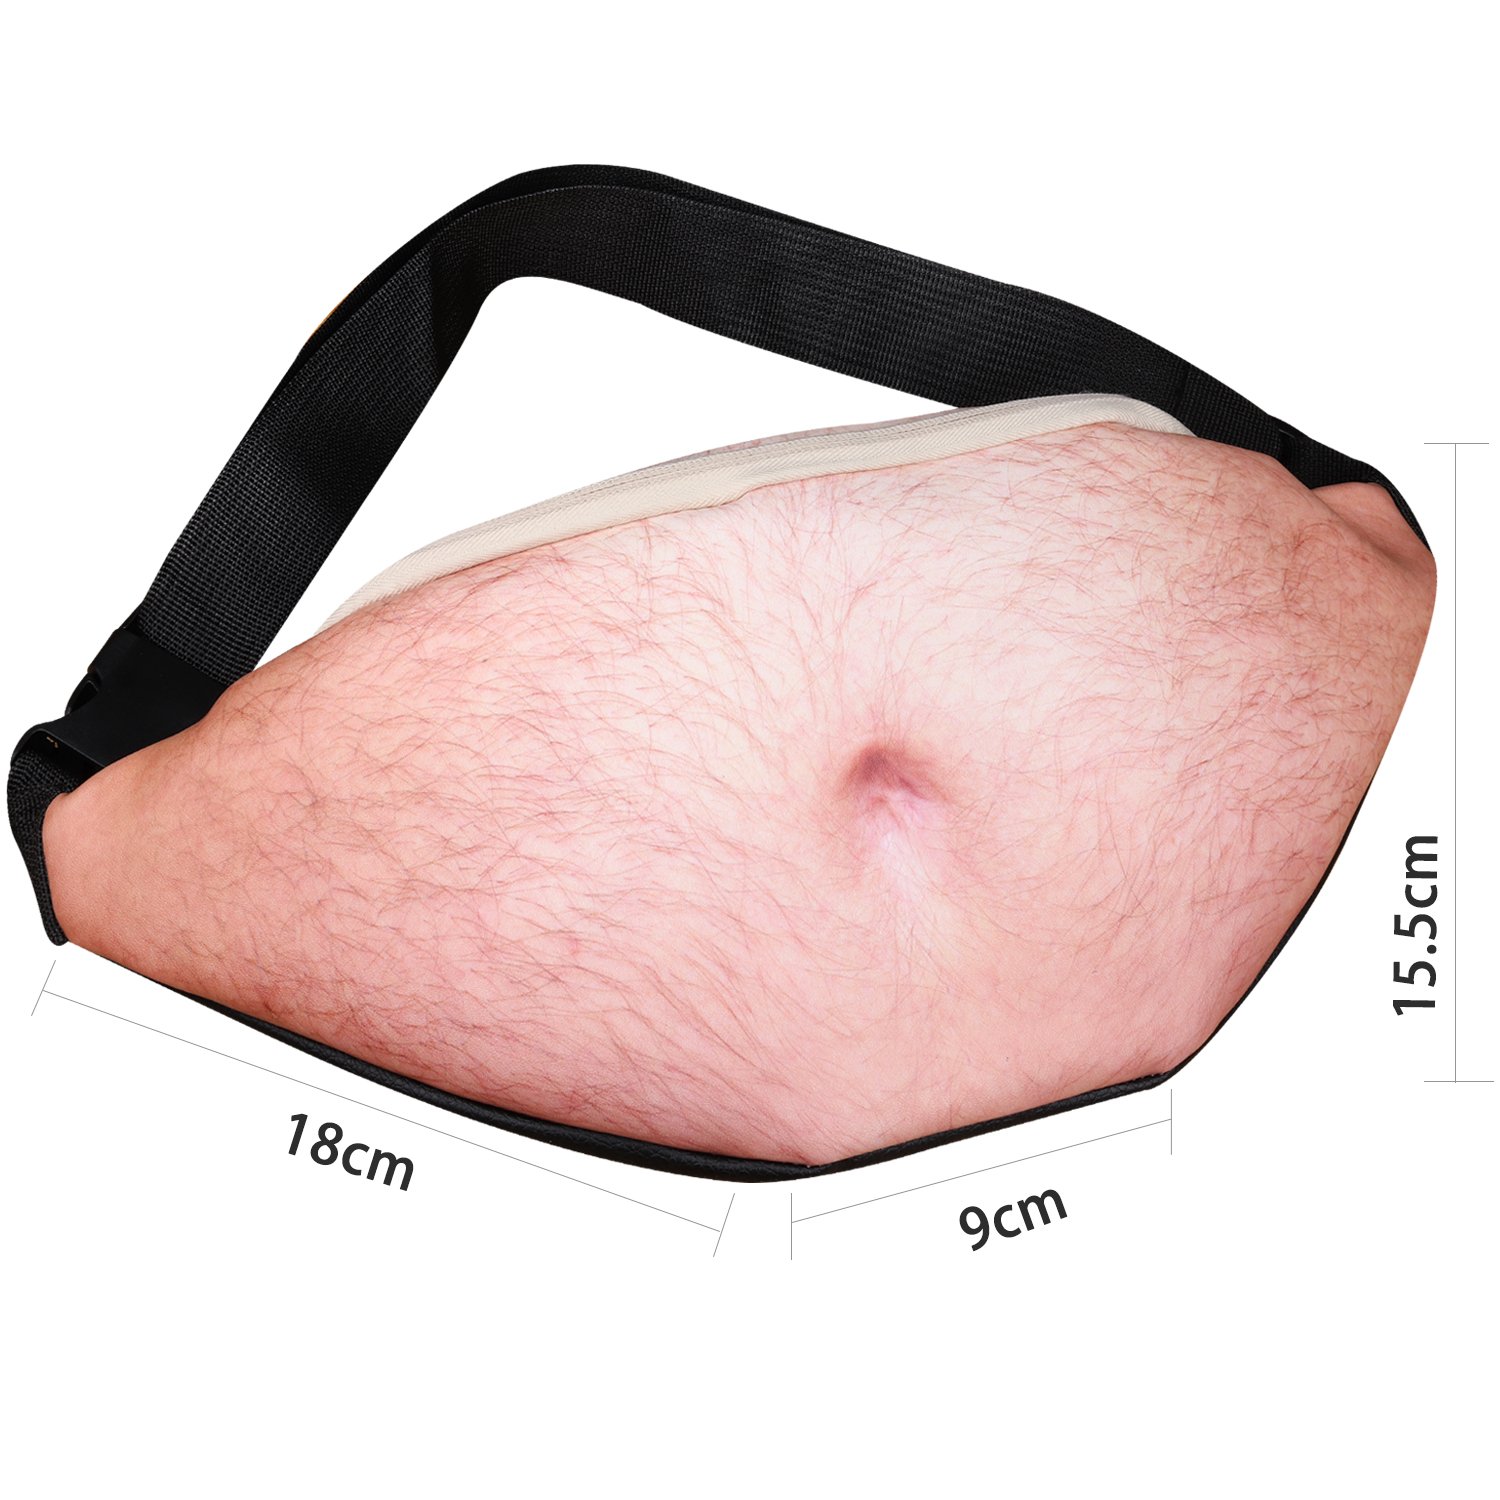 A AIFAMY 3D Dad Beer Belly Fanny Pack Waist Pocket Funny Gag Gifts for Christmas, White Elephant Gift Exchange